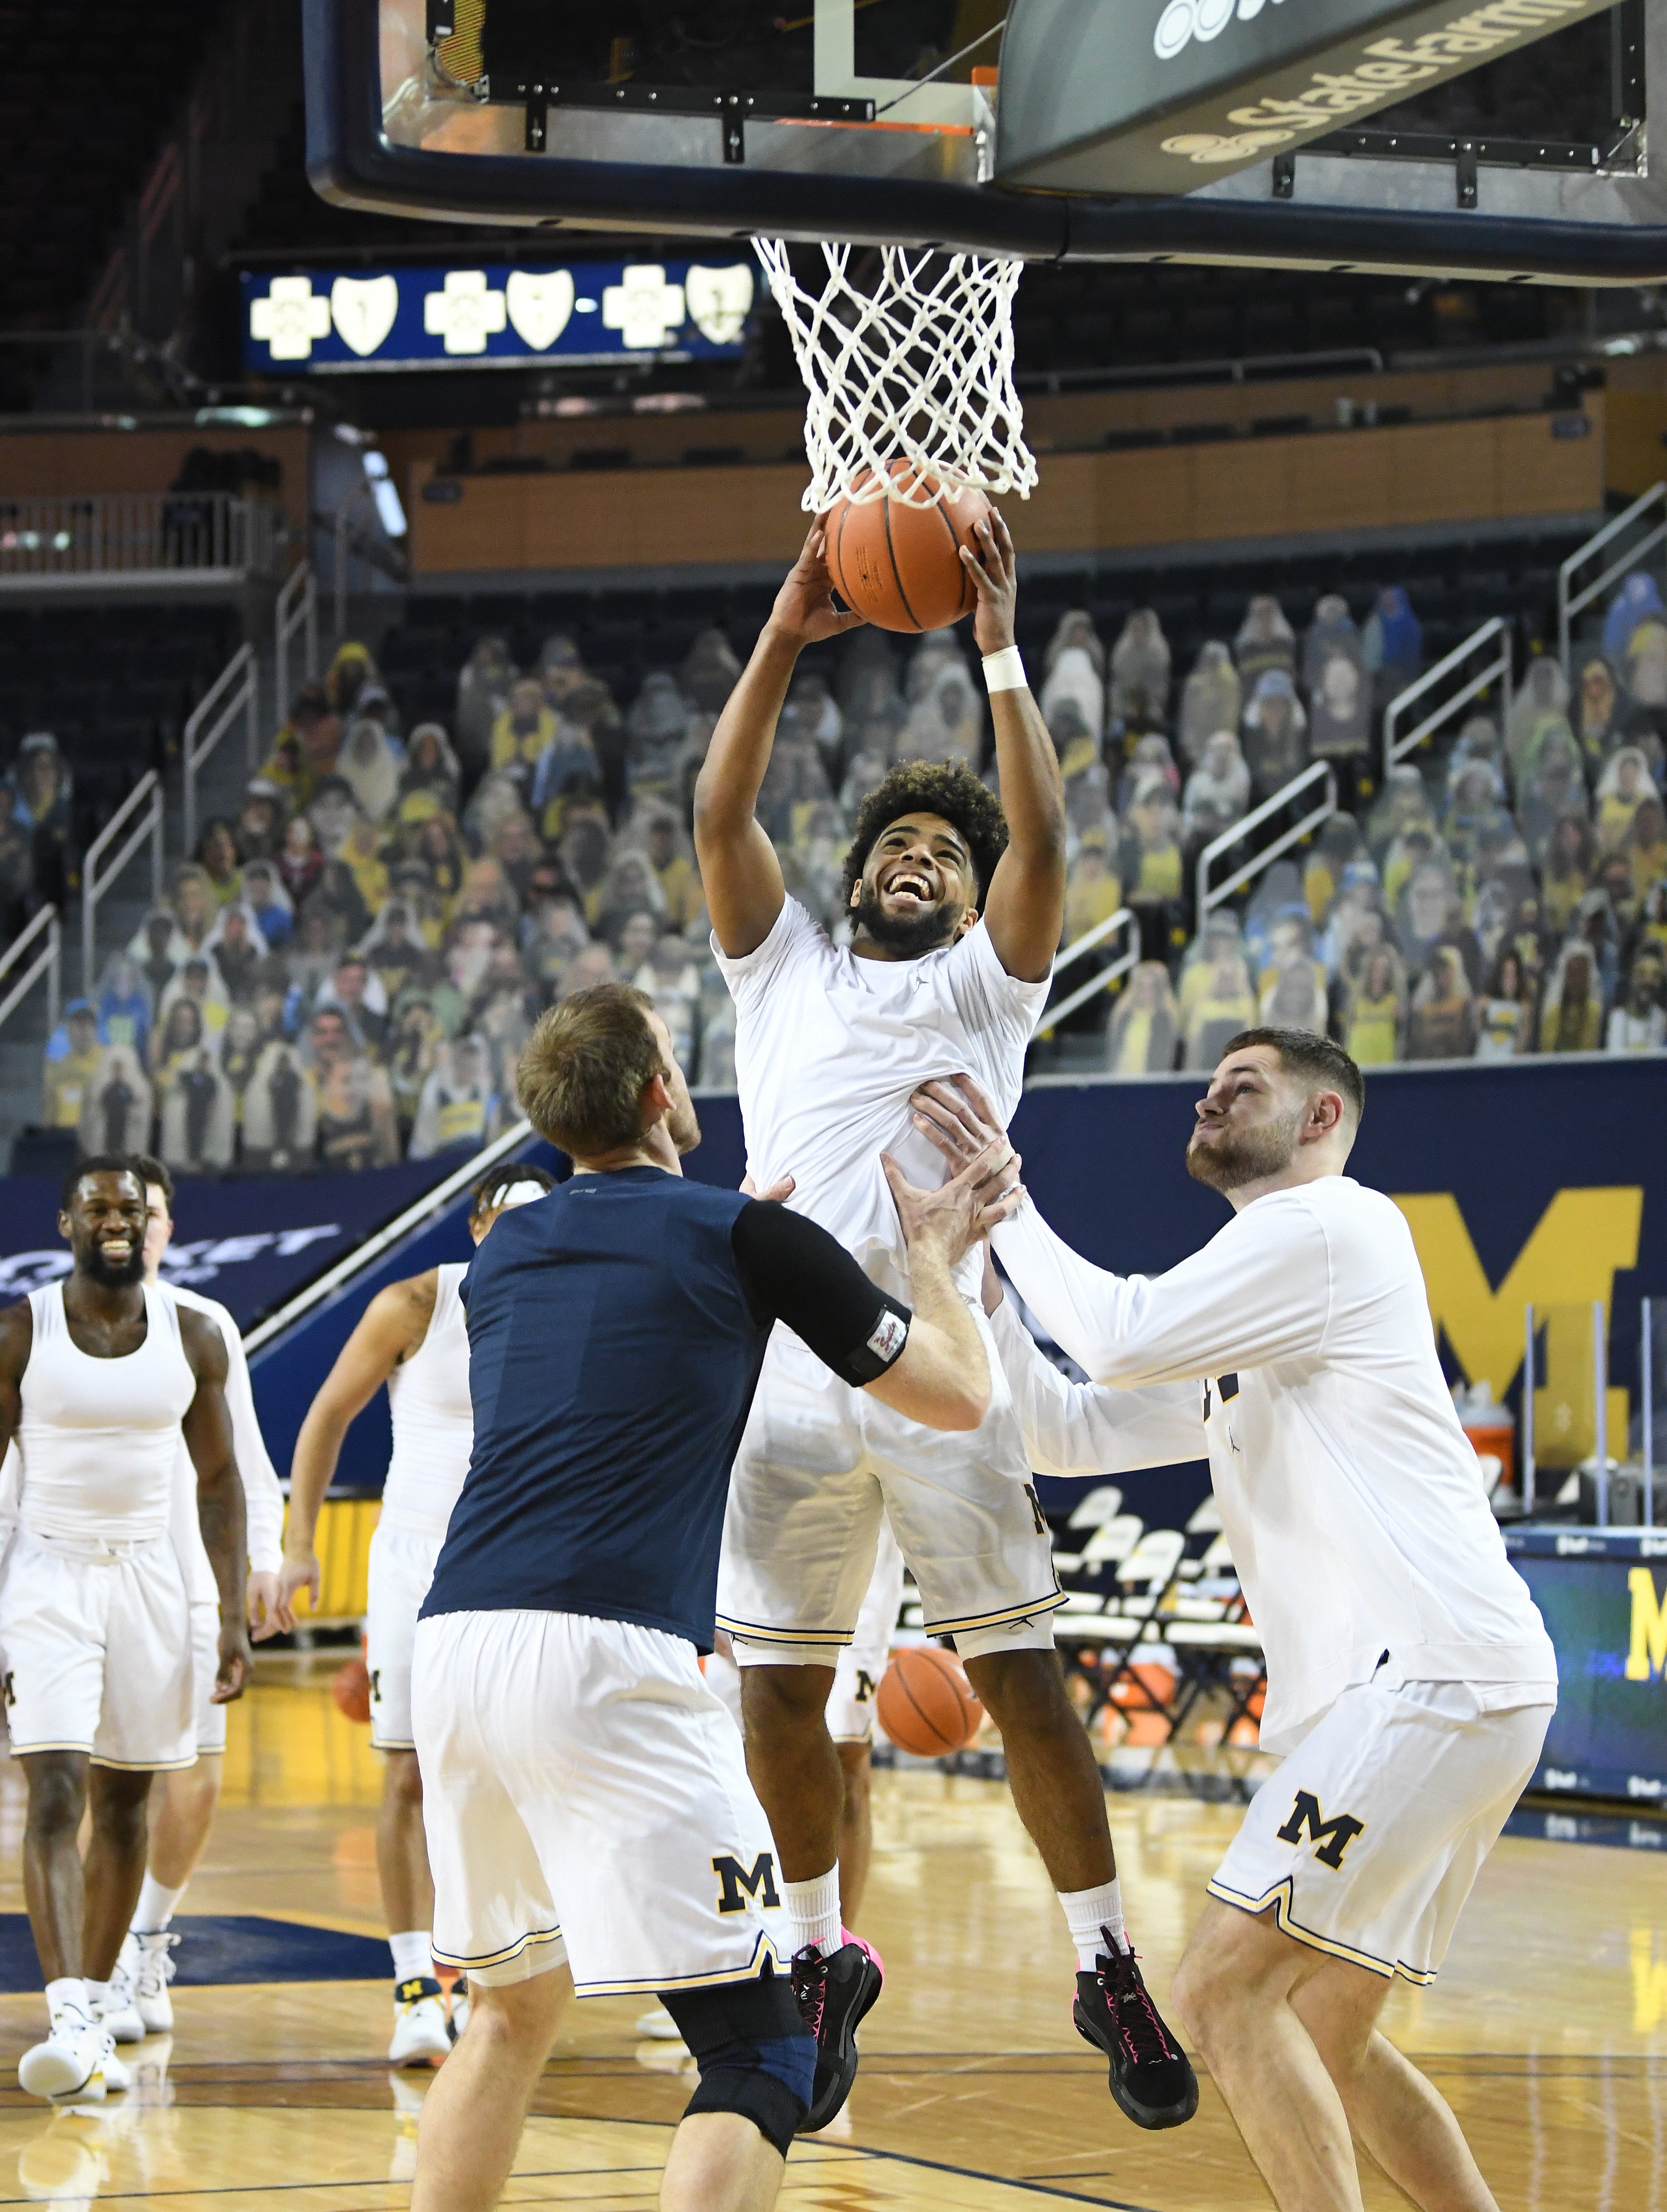 Michigan's Mike Davis dunks, with some help from teammates Austin Davis and Hunter Dickinson, at the end of warmups.